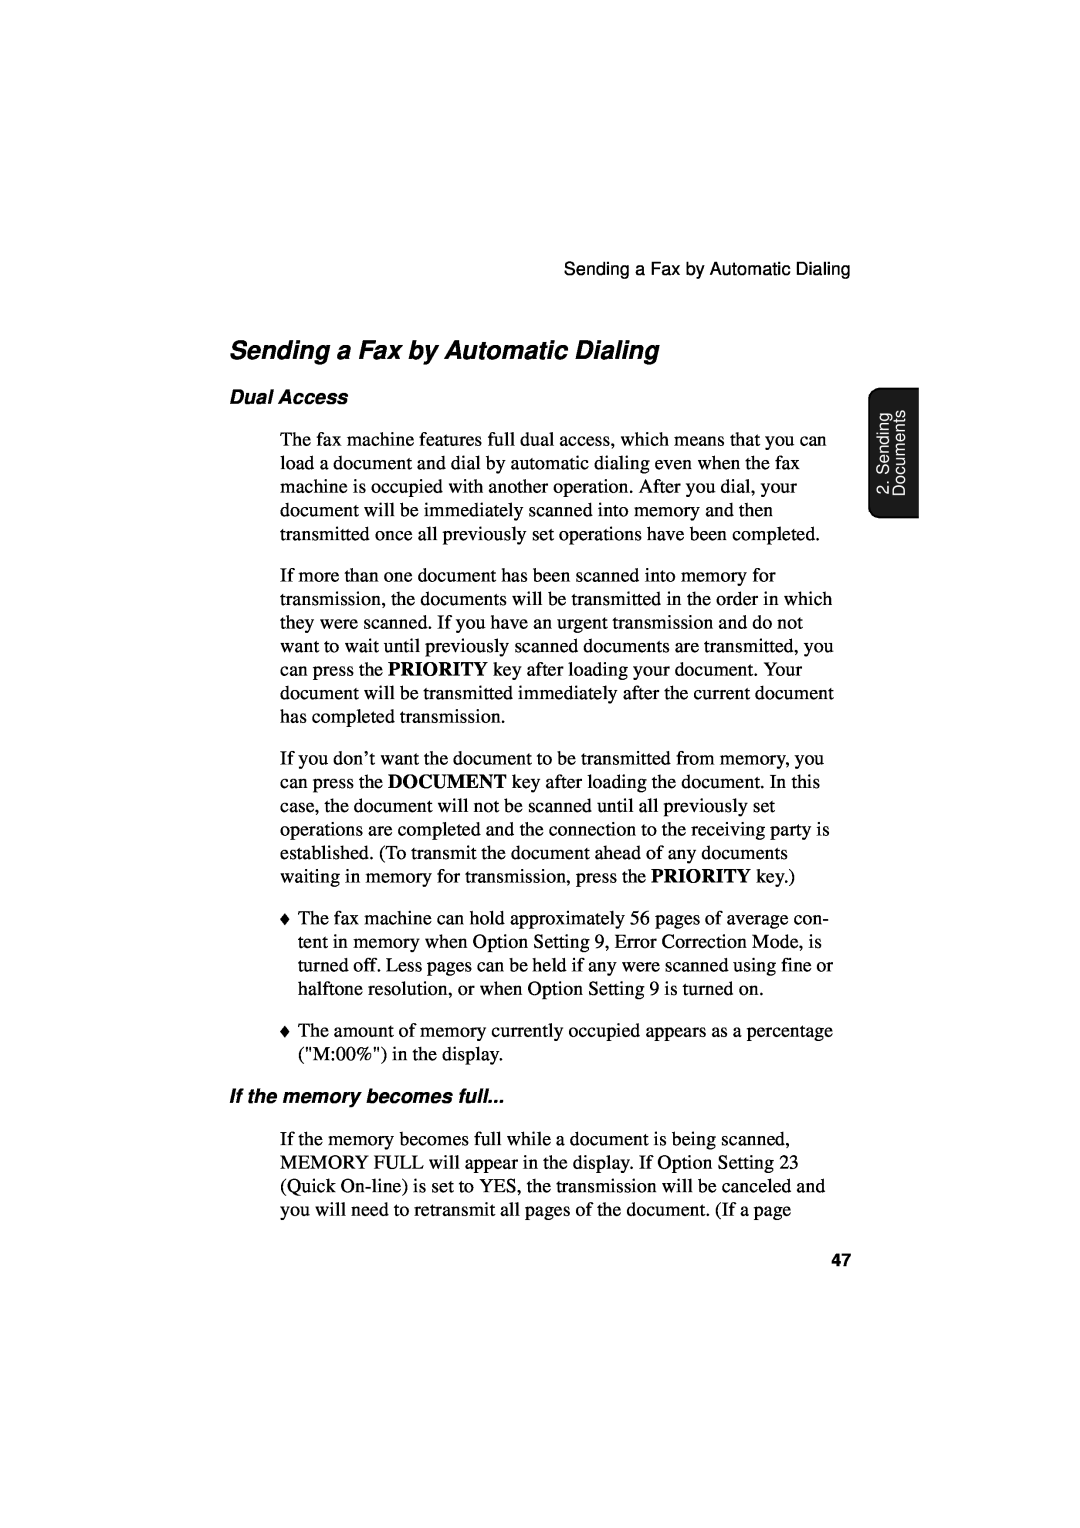 Sharp FO-4700, FO-5700, FO-5550 operation manual Sending a Fax by Automatic Dialing, Dual Access, If the memory becomes full 